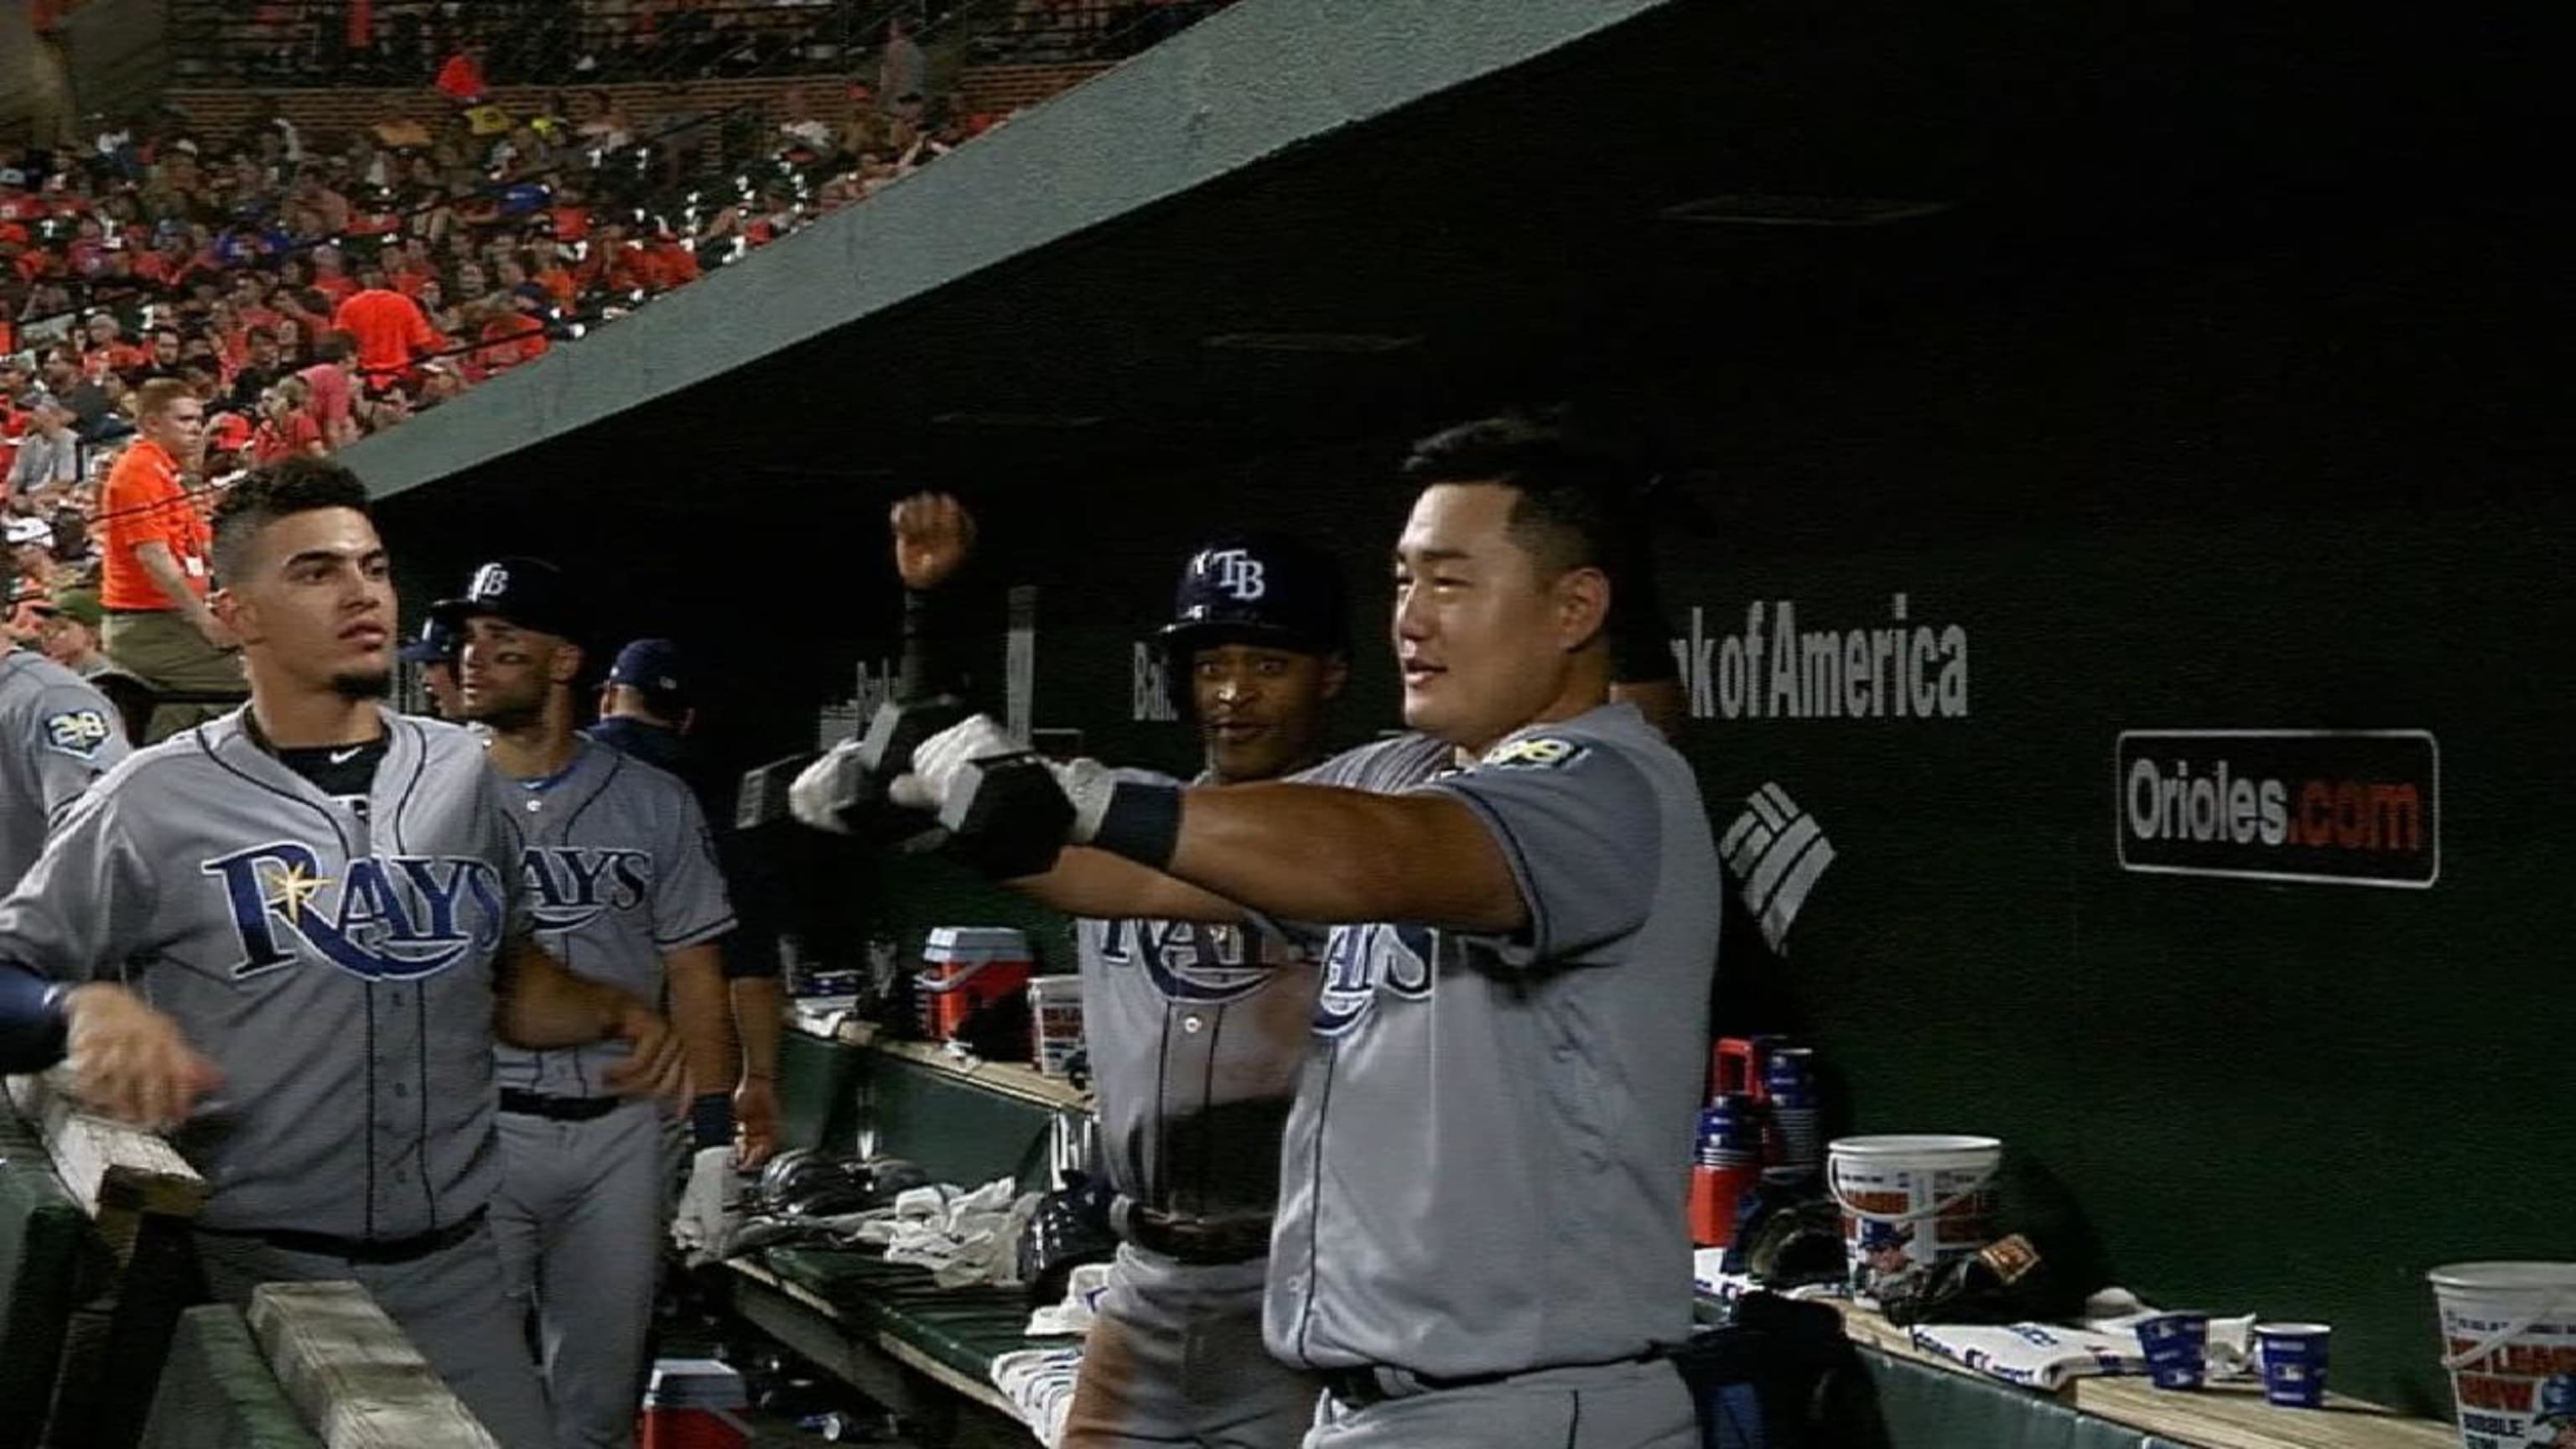 Ji-Man Choi lifted weights in the Rays' dugout after narrowly missing a  go-ahead homer